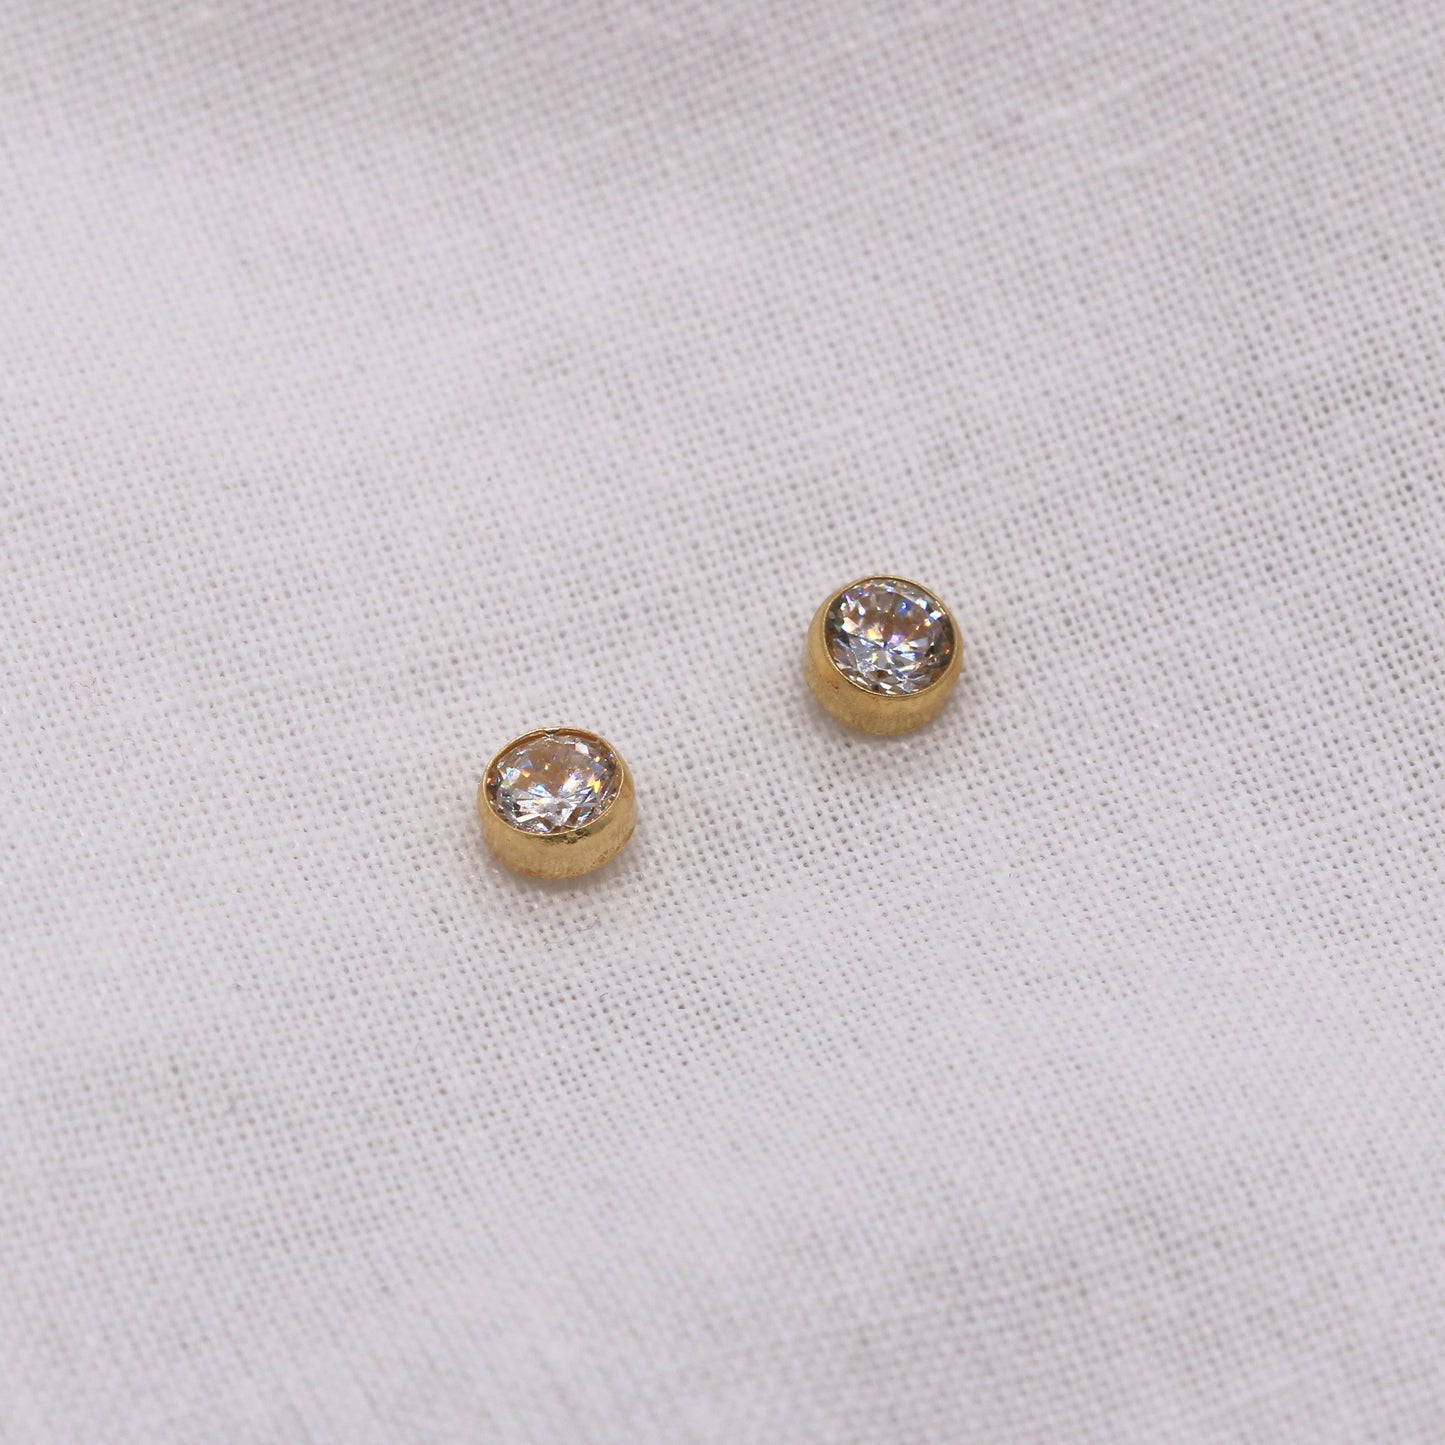 9ct Solid Yellow Gold Circle Stud Earrings With Cz